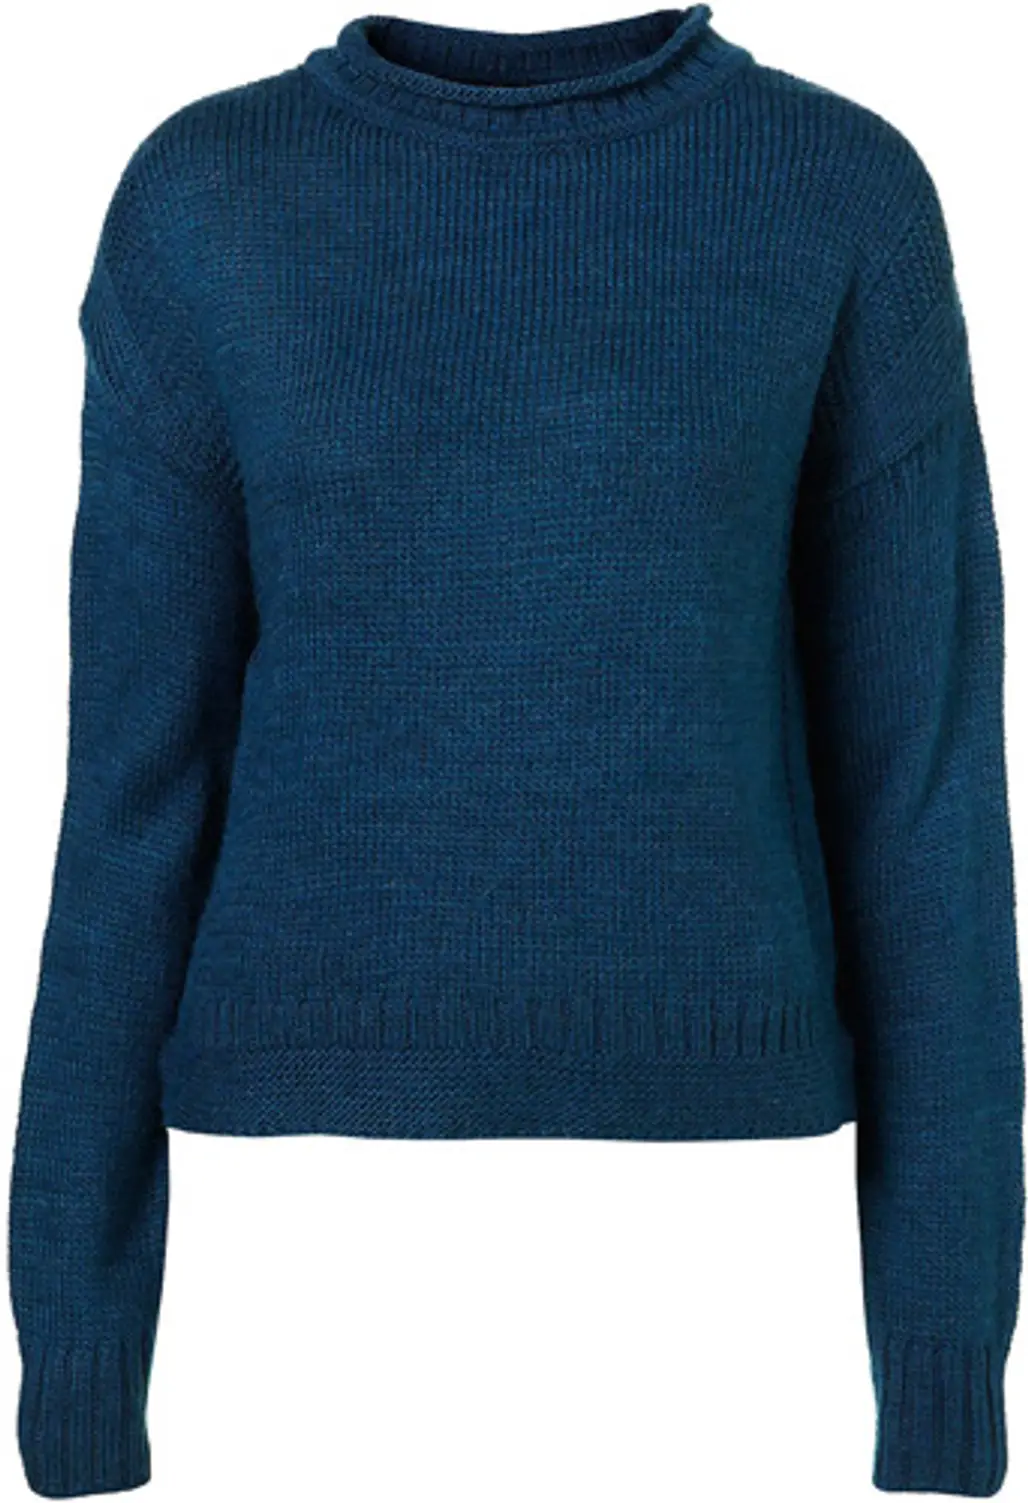 Topshop Knitted Sweater